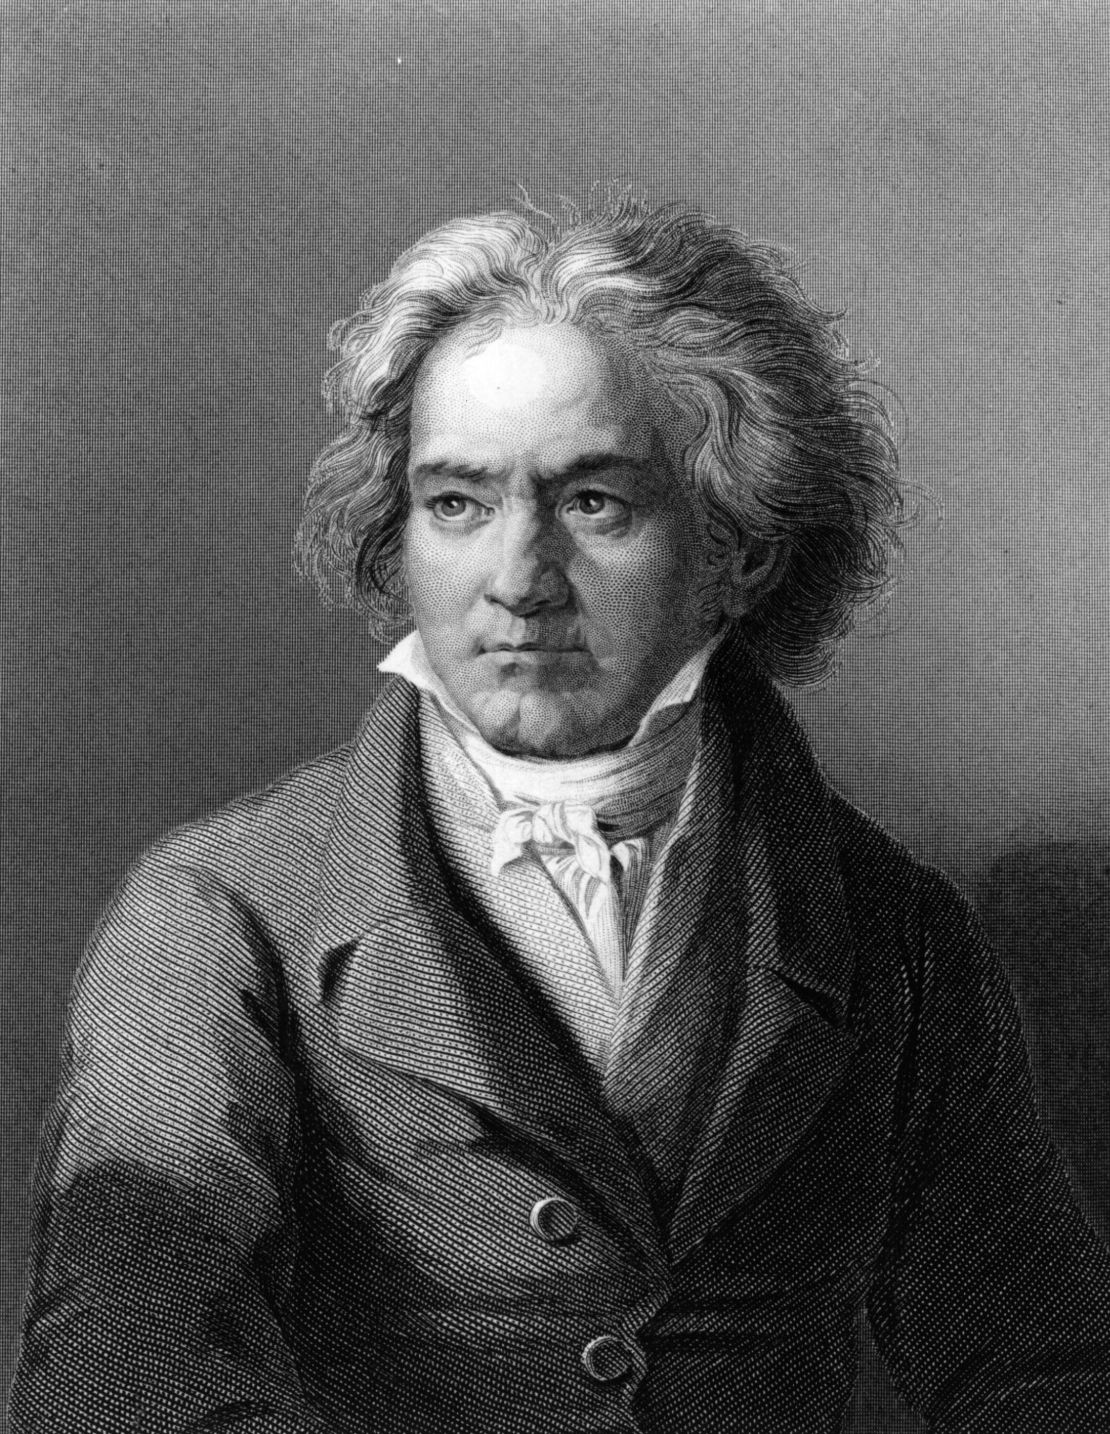 Beethoven was born 250 years ago, on December 17, 1770.